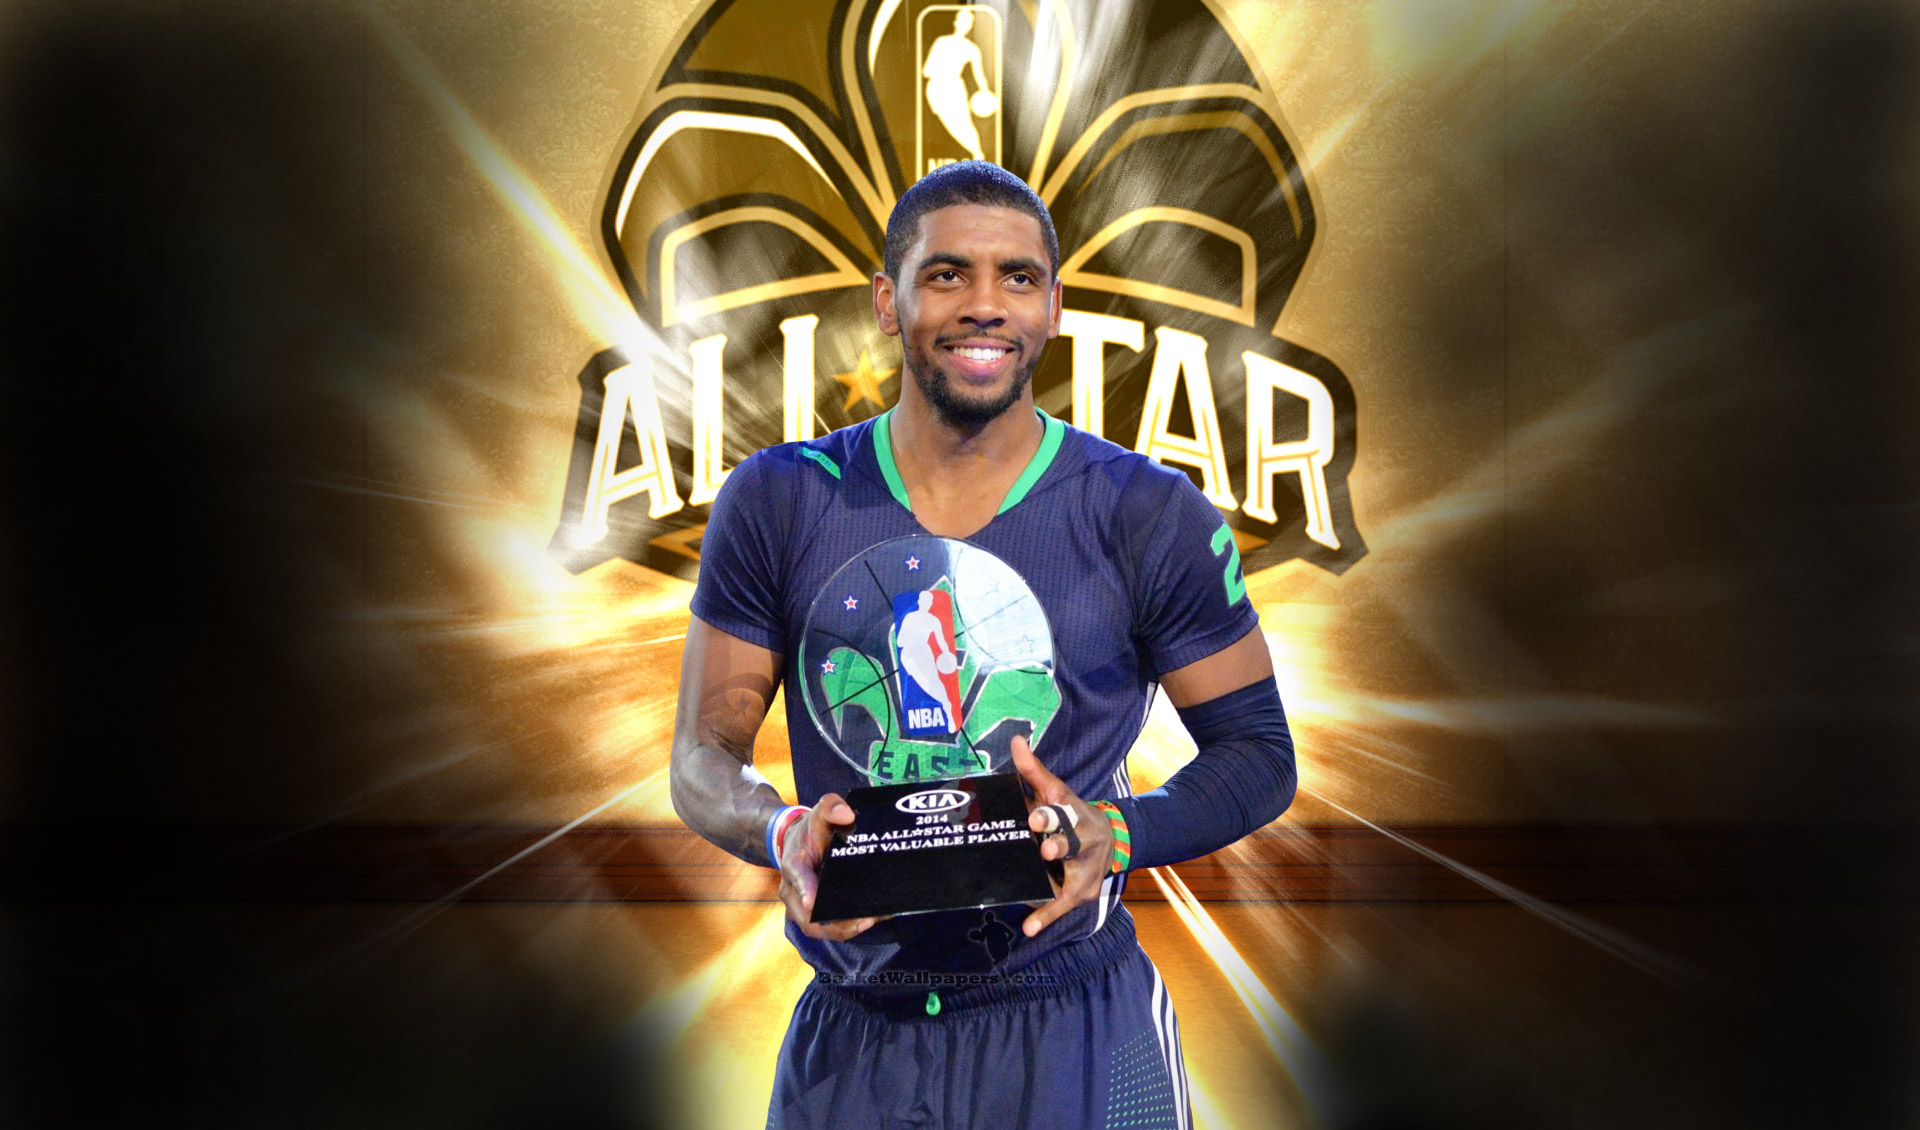 Kyrie Irving Wallpaper Projects  Photos videos logos illustrations and  branding on Behance